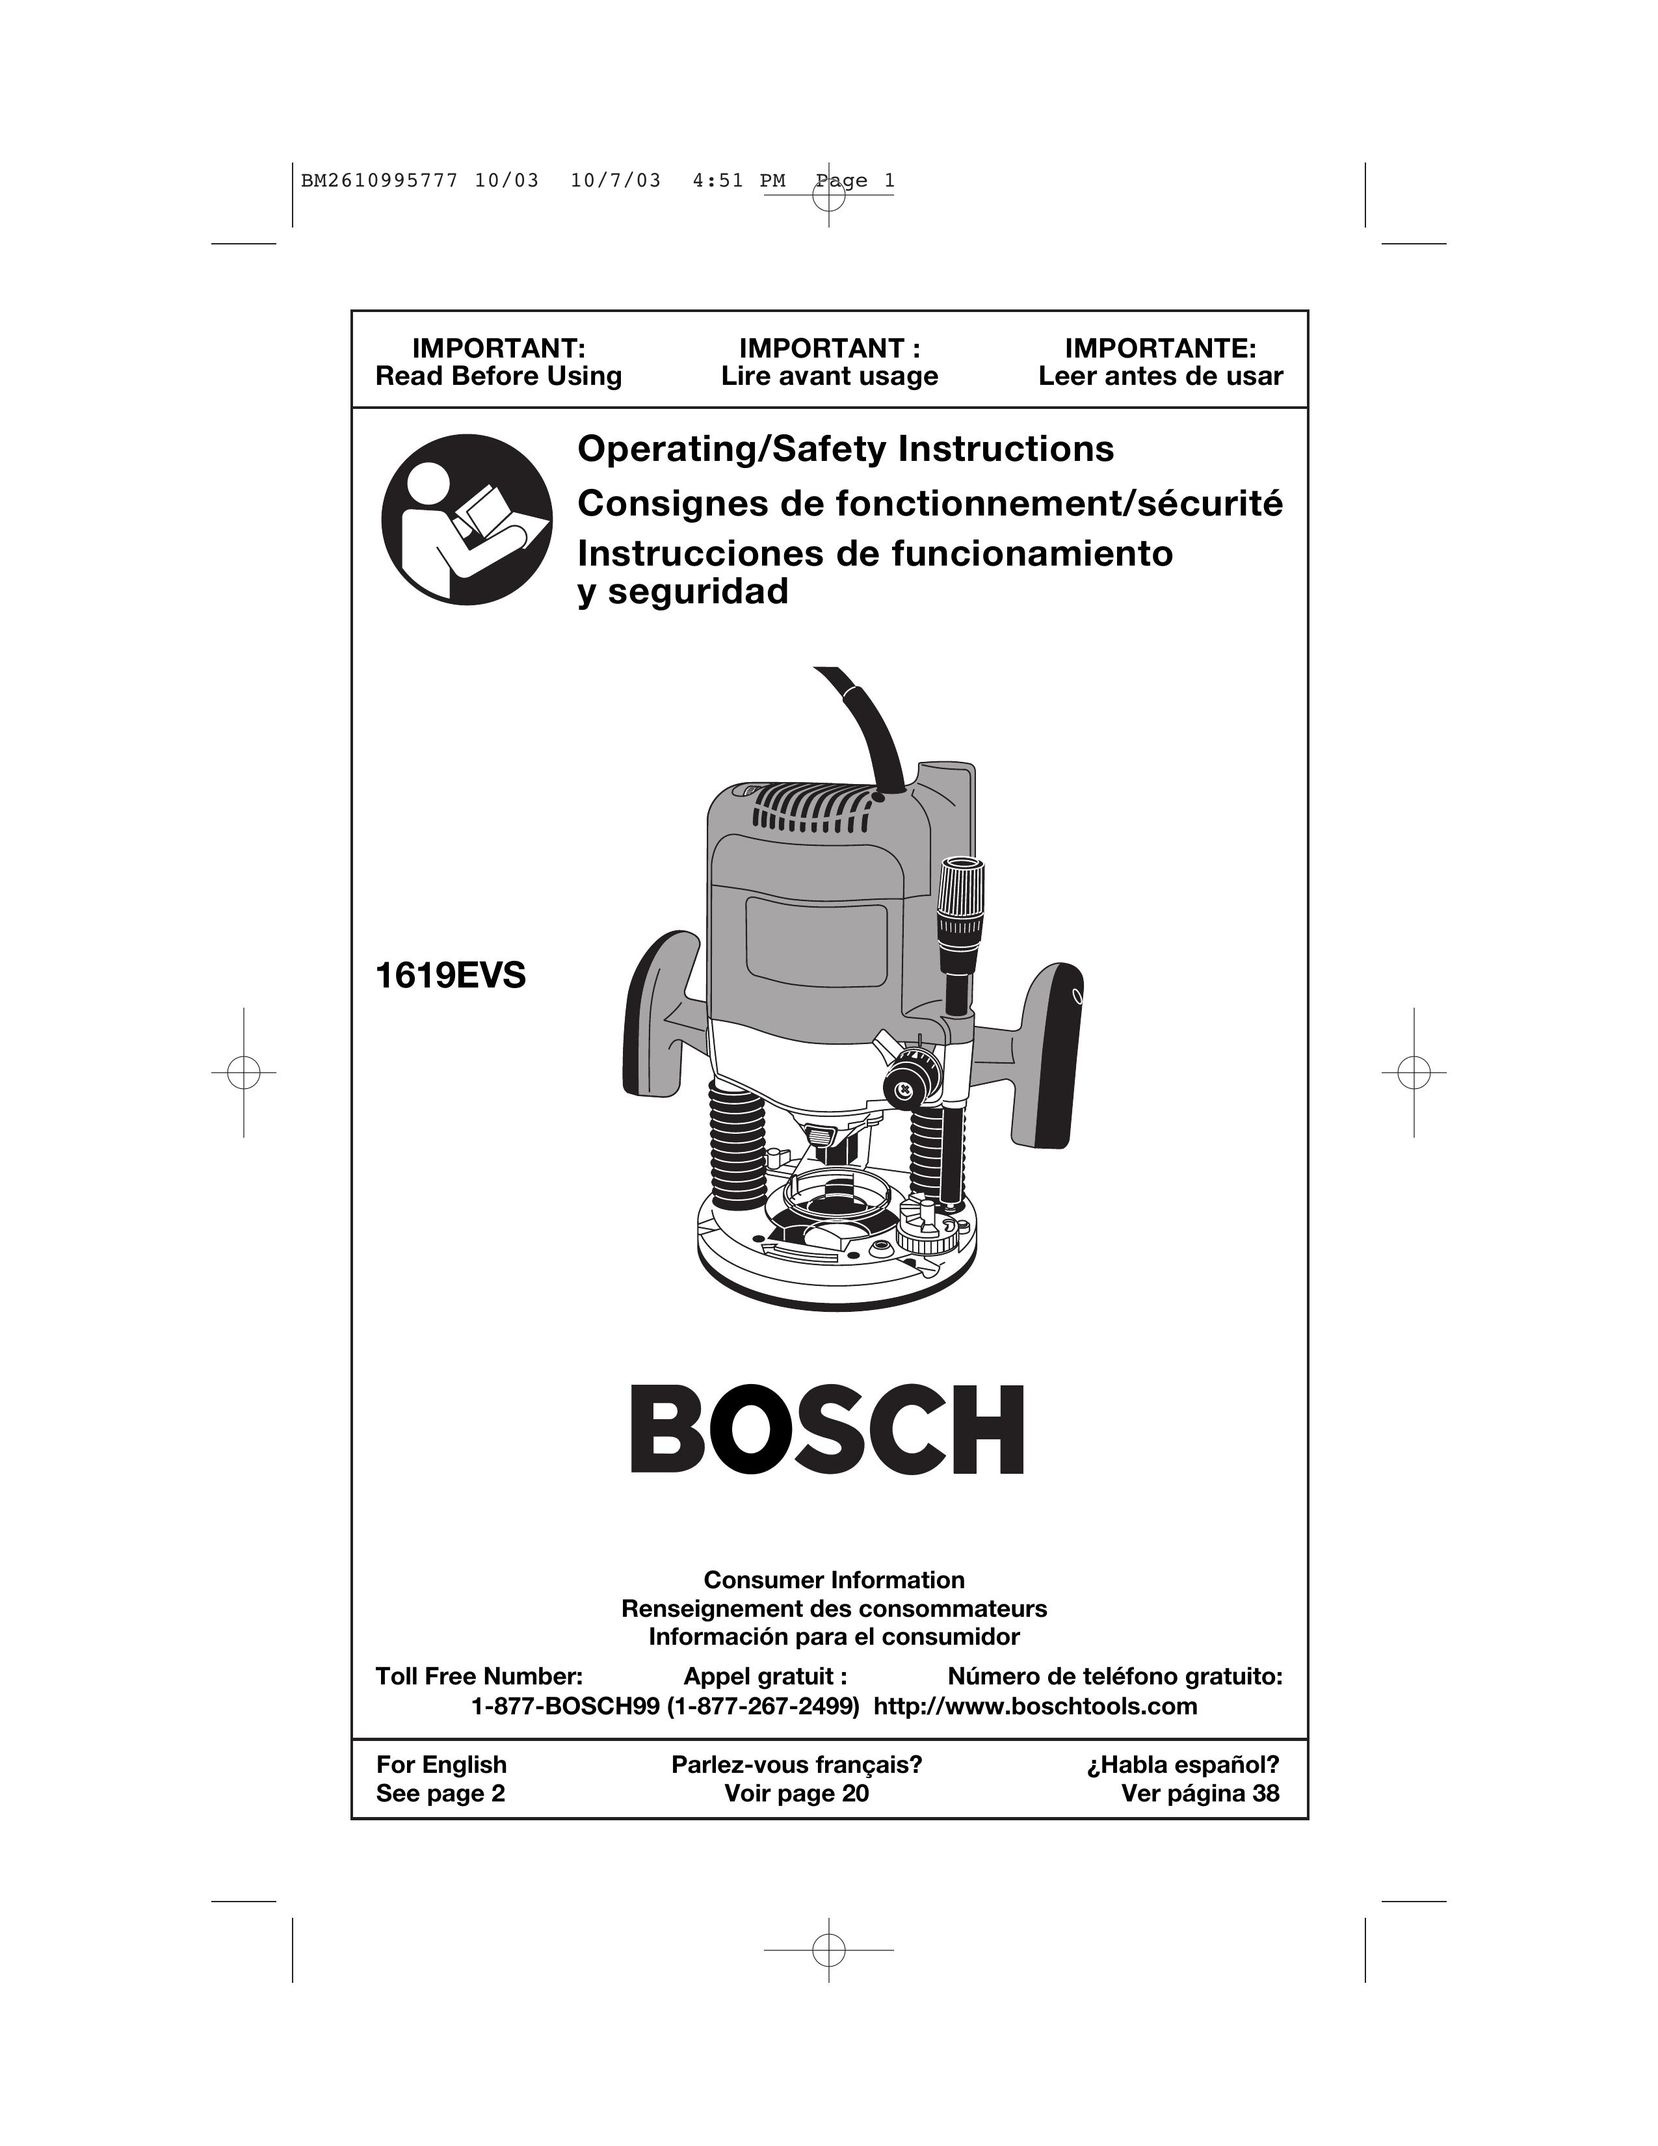 Bosch Power Tools 1619EVS Router User Manual